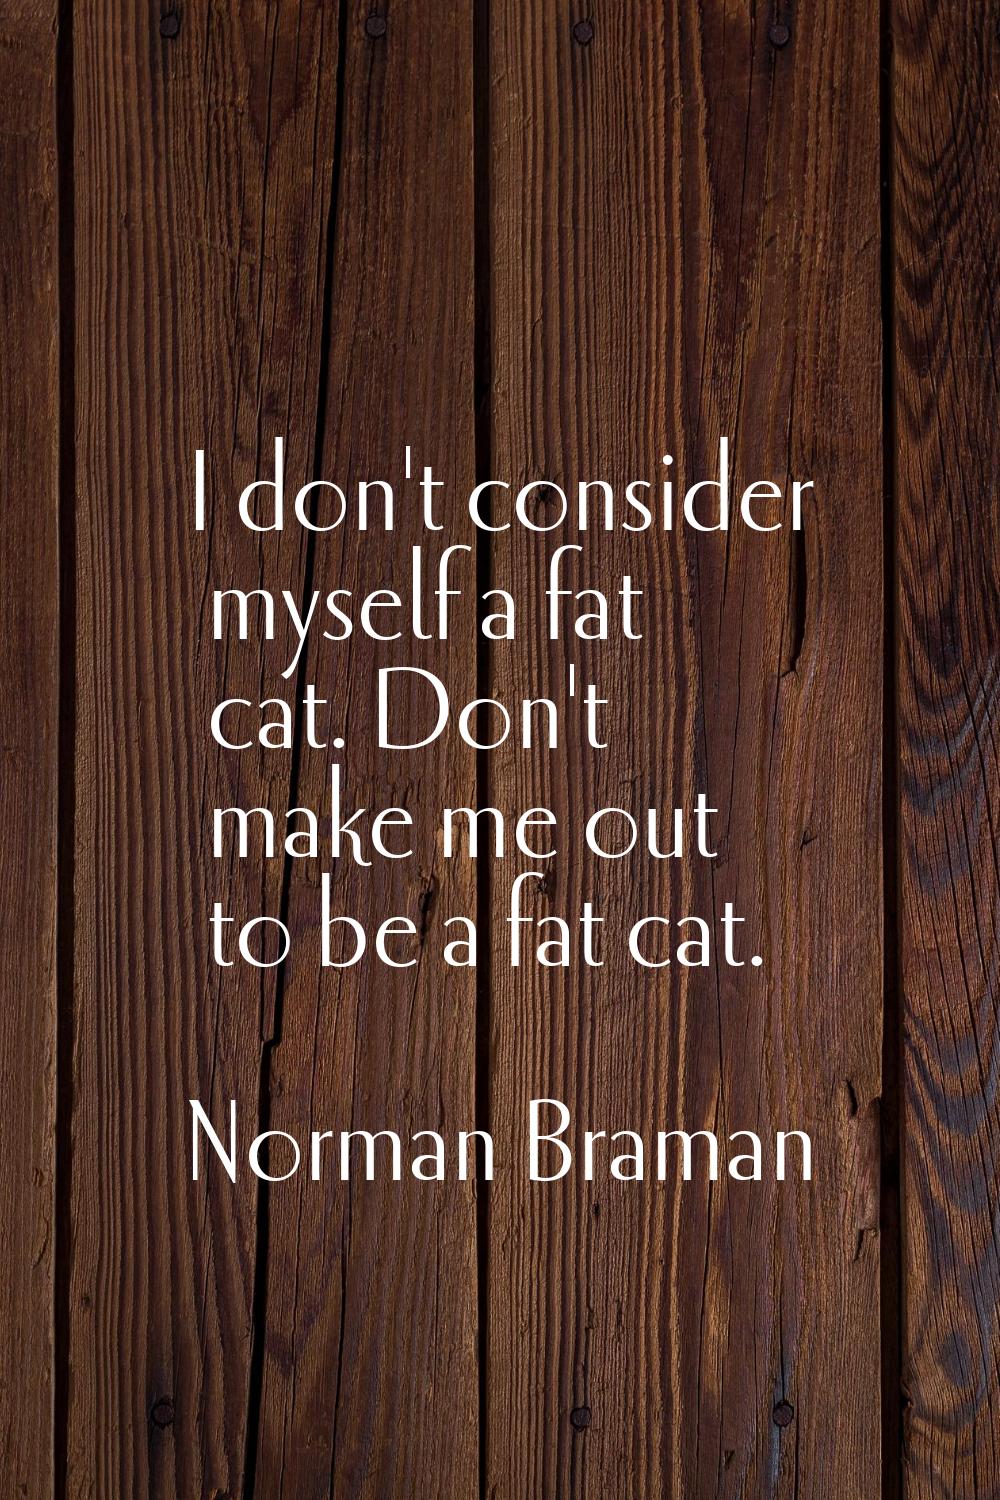 I don't consider myself a fat cat. Don't make me out to be a fat cat.